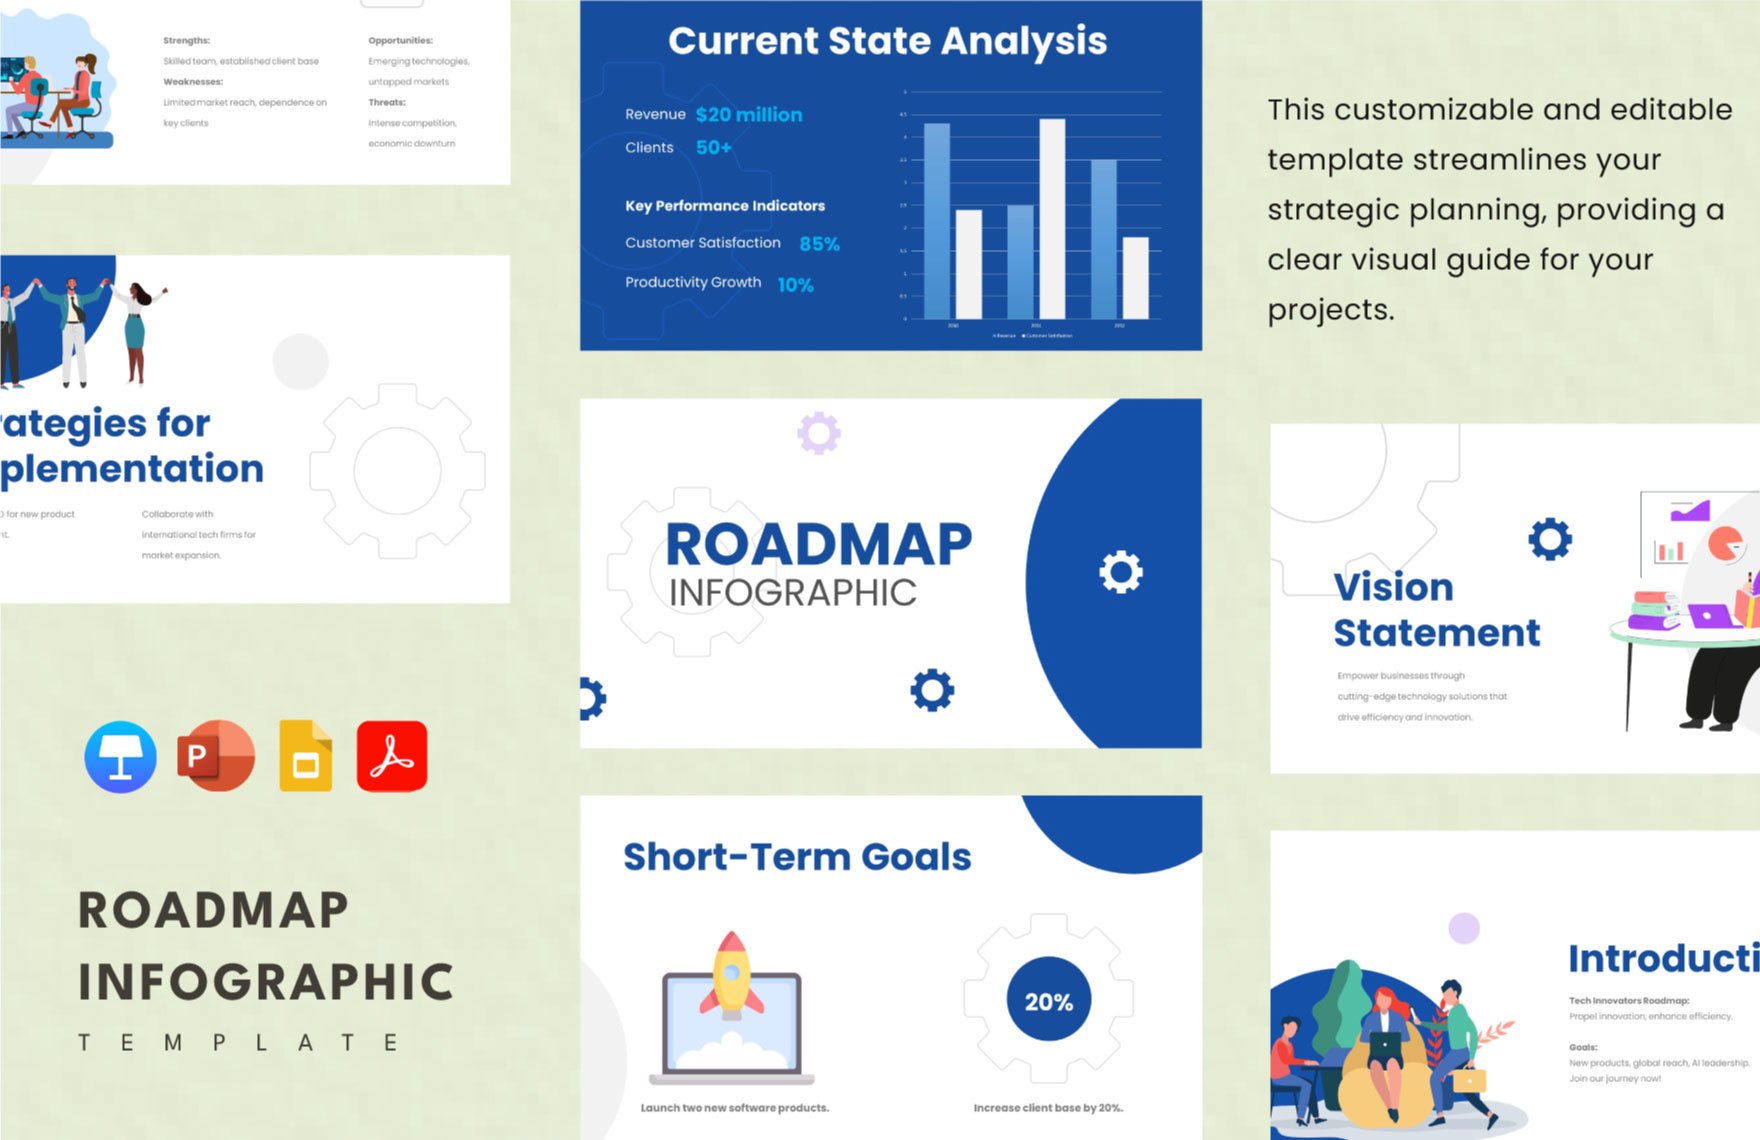 Free Roadmap Infographic Template